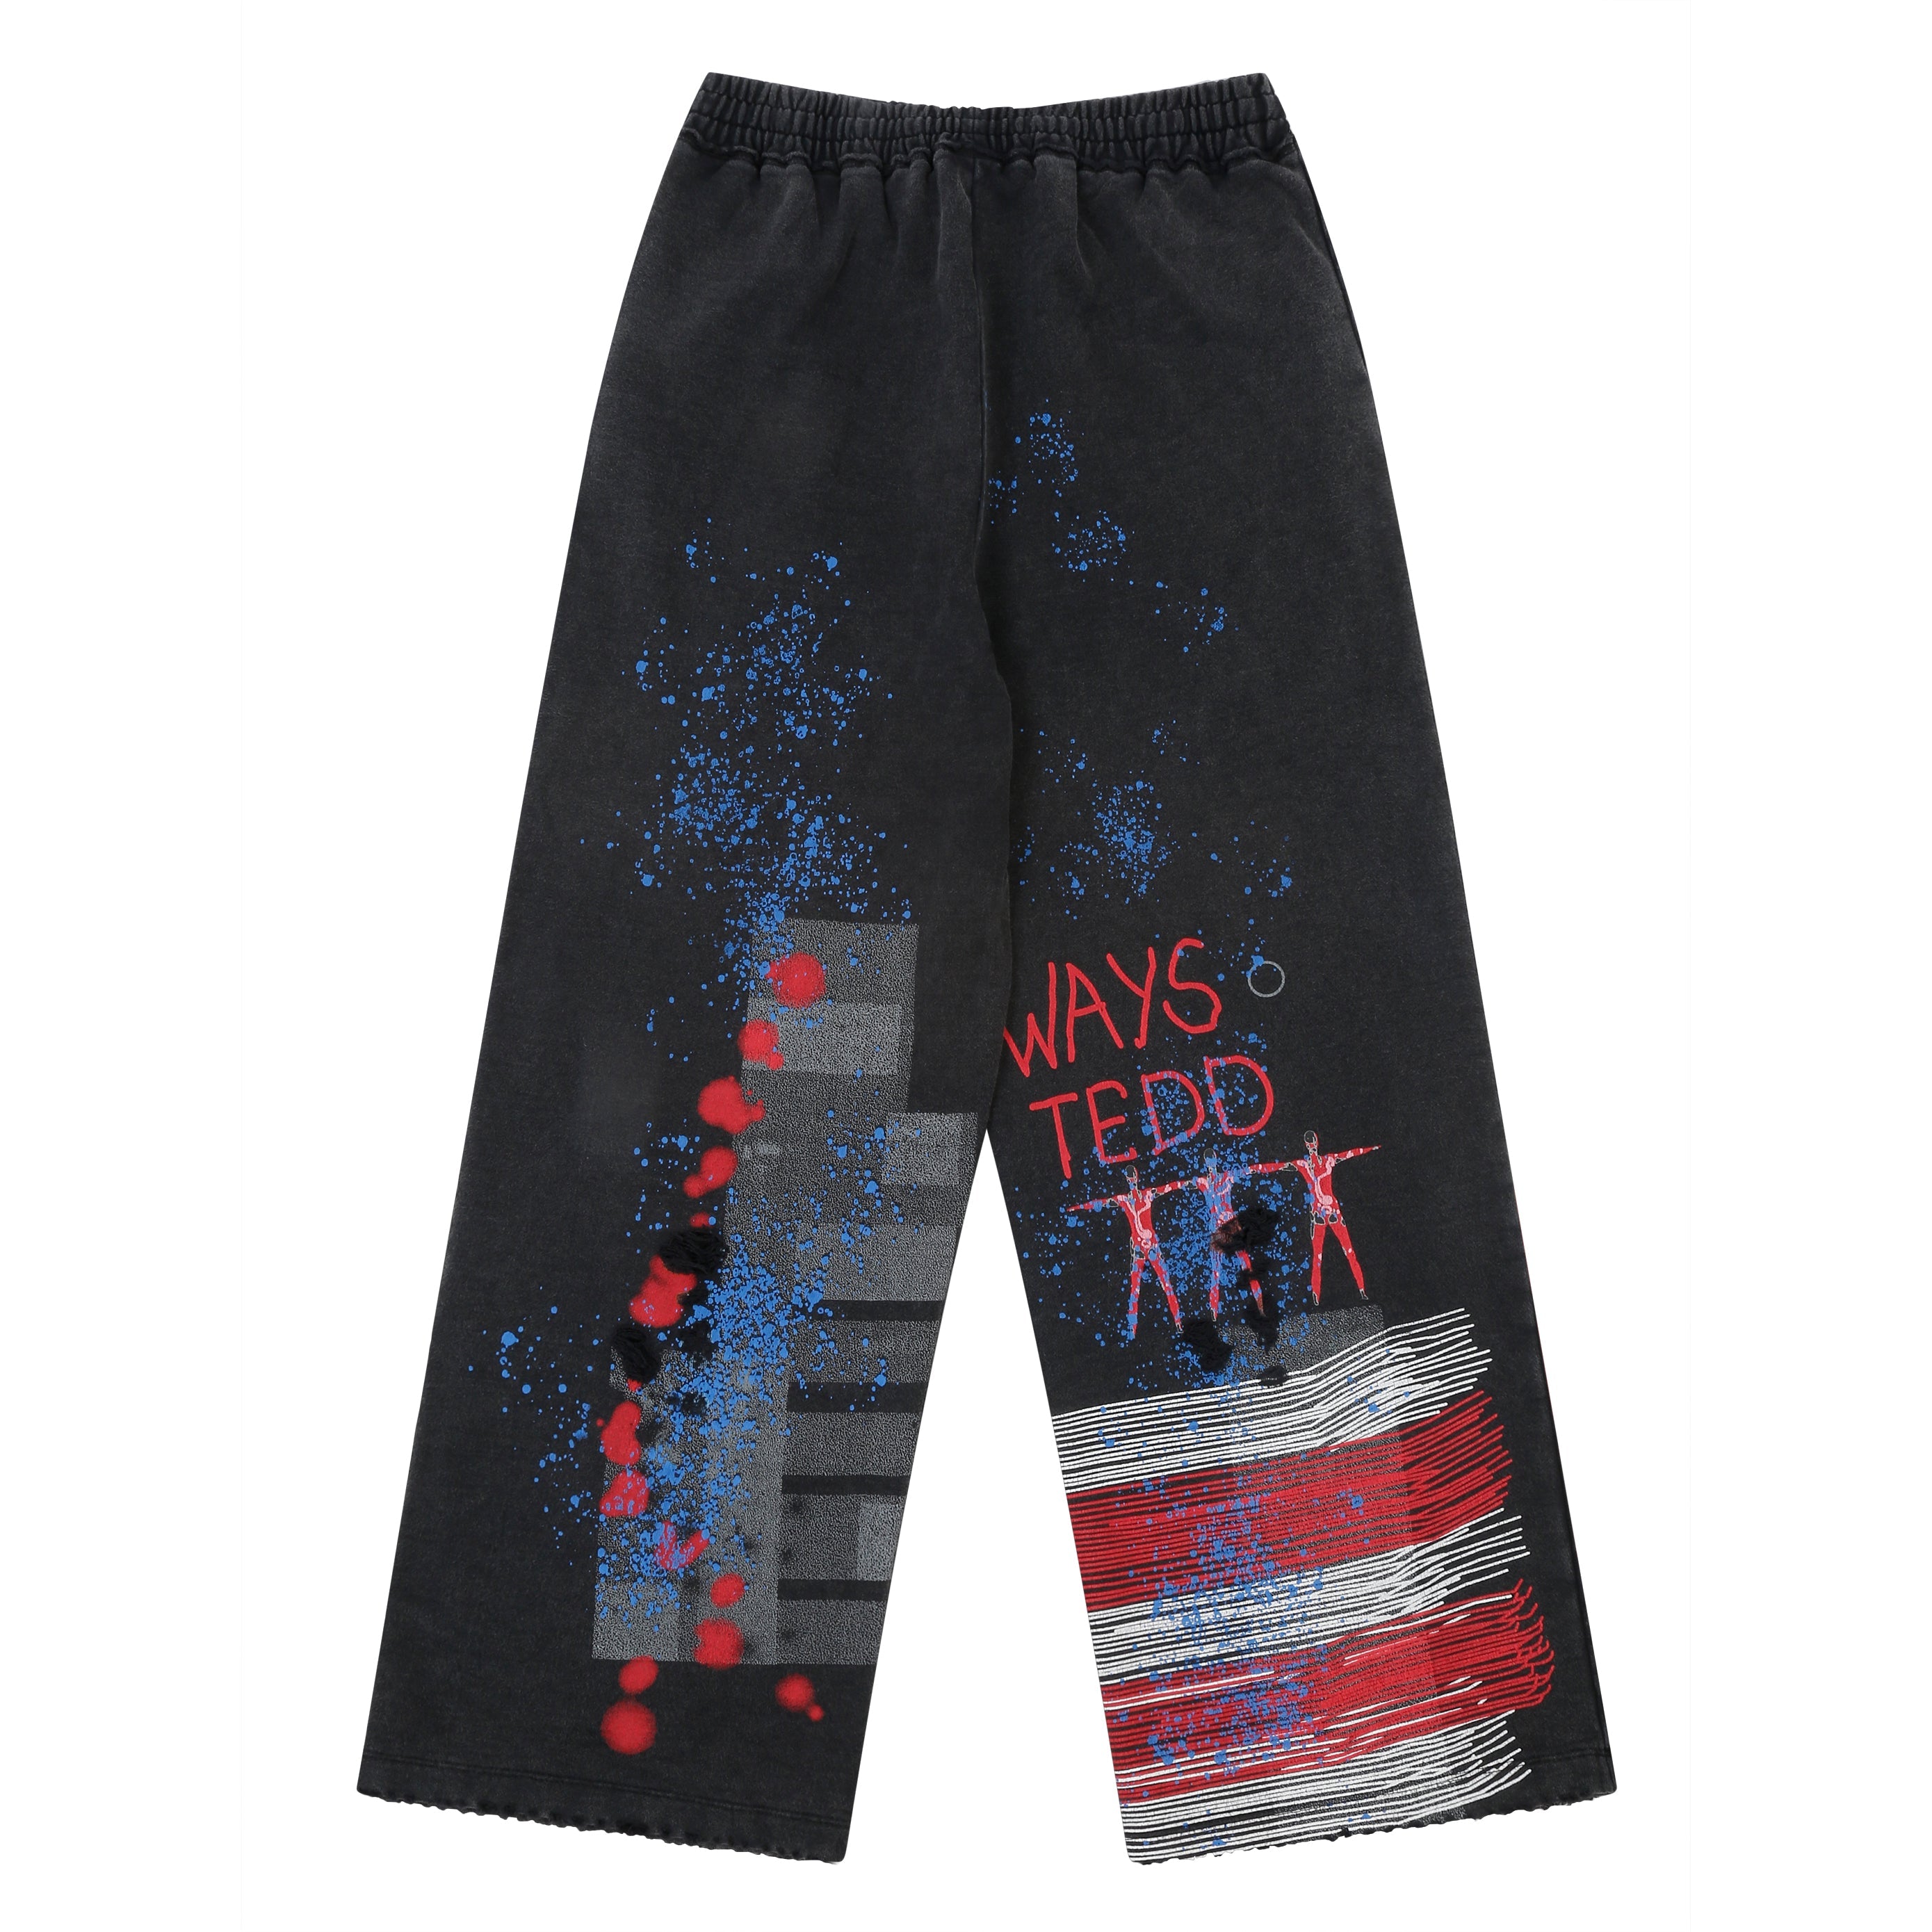 Sweatpants - Charcoal "Fly Me To The Moon"